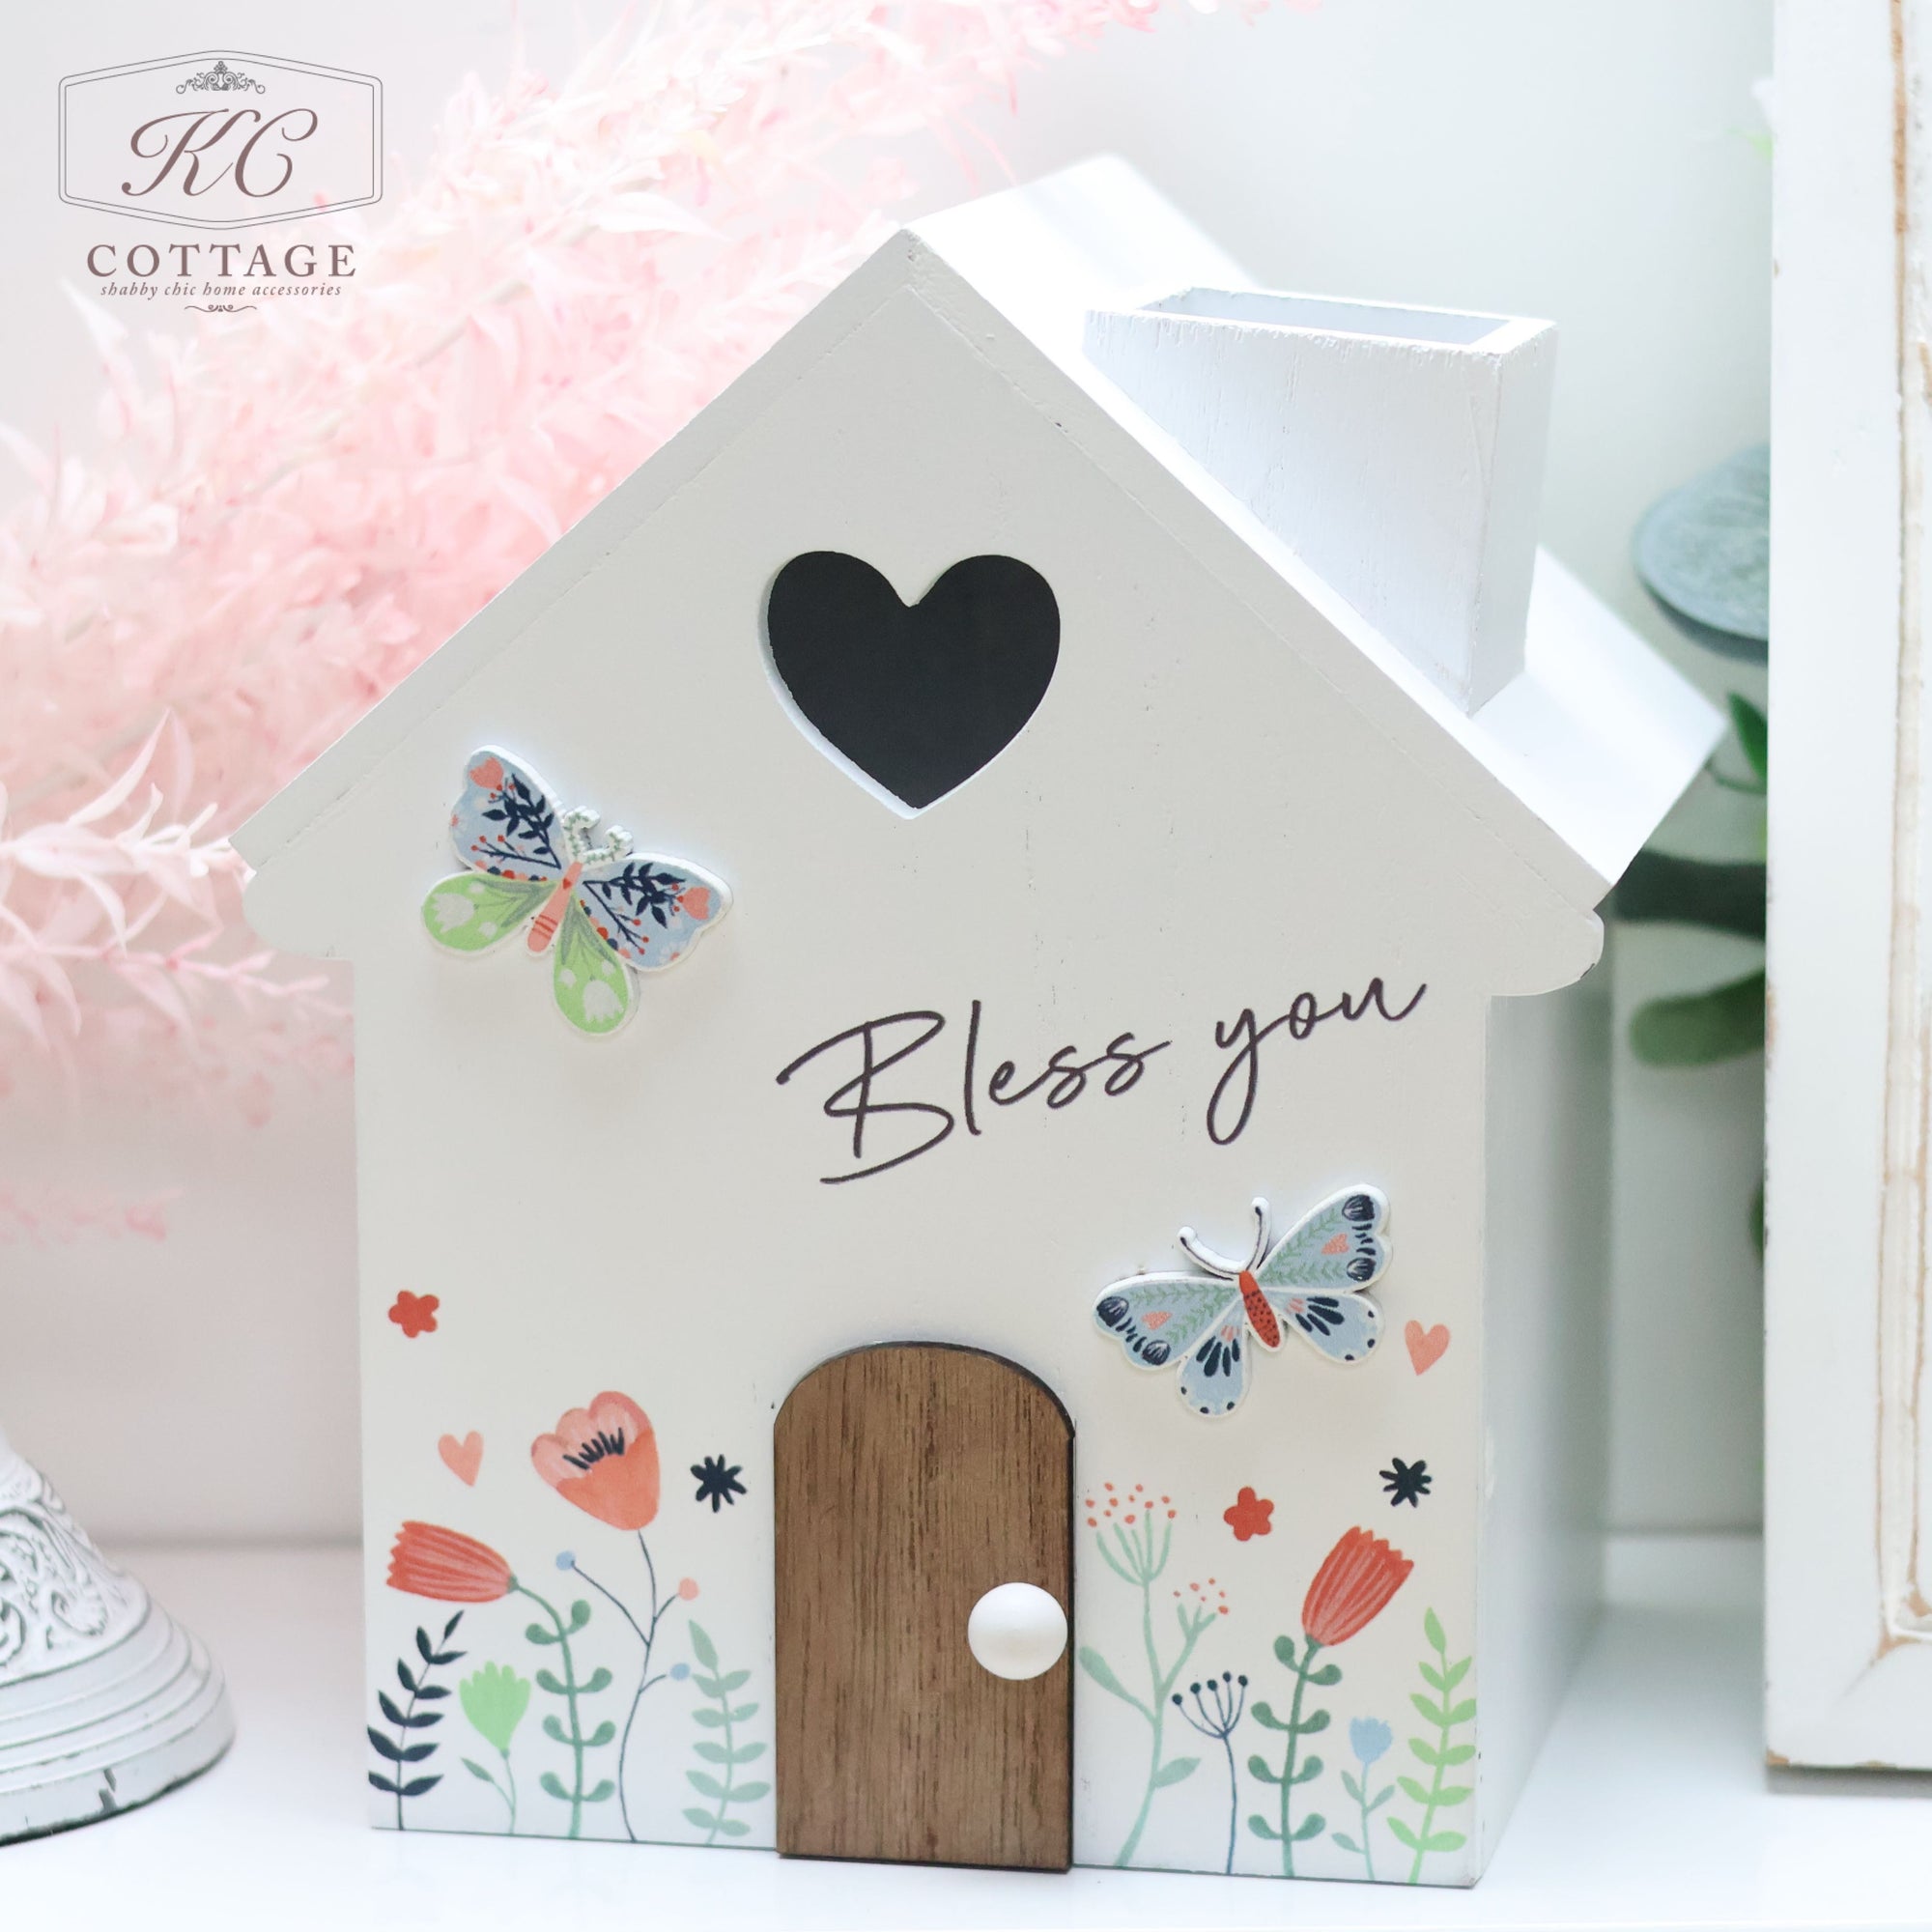 A Butterfly Tissue Holder House with a heart-shaped cutout at the top, adorned with butterfly and floral designs. The words "Bless you" are written on the front, making it perfect for home decor. The background features pink and green foliage, adding a charming touch.